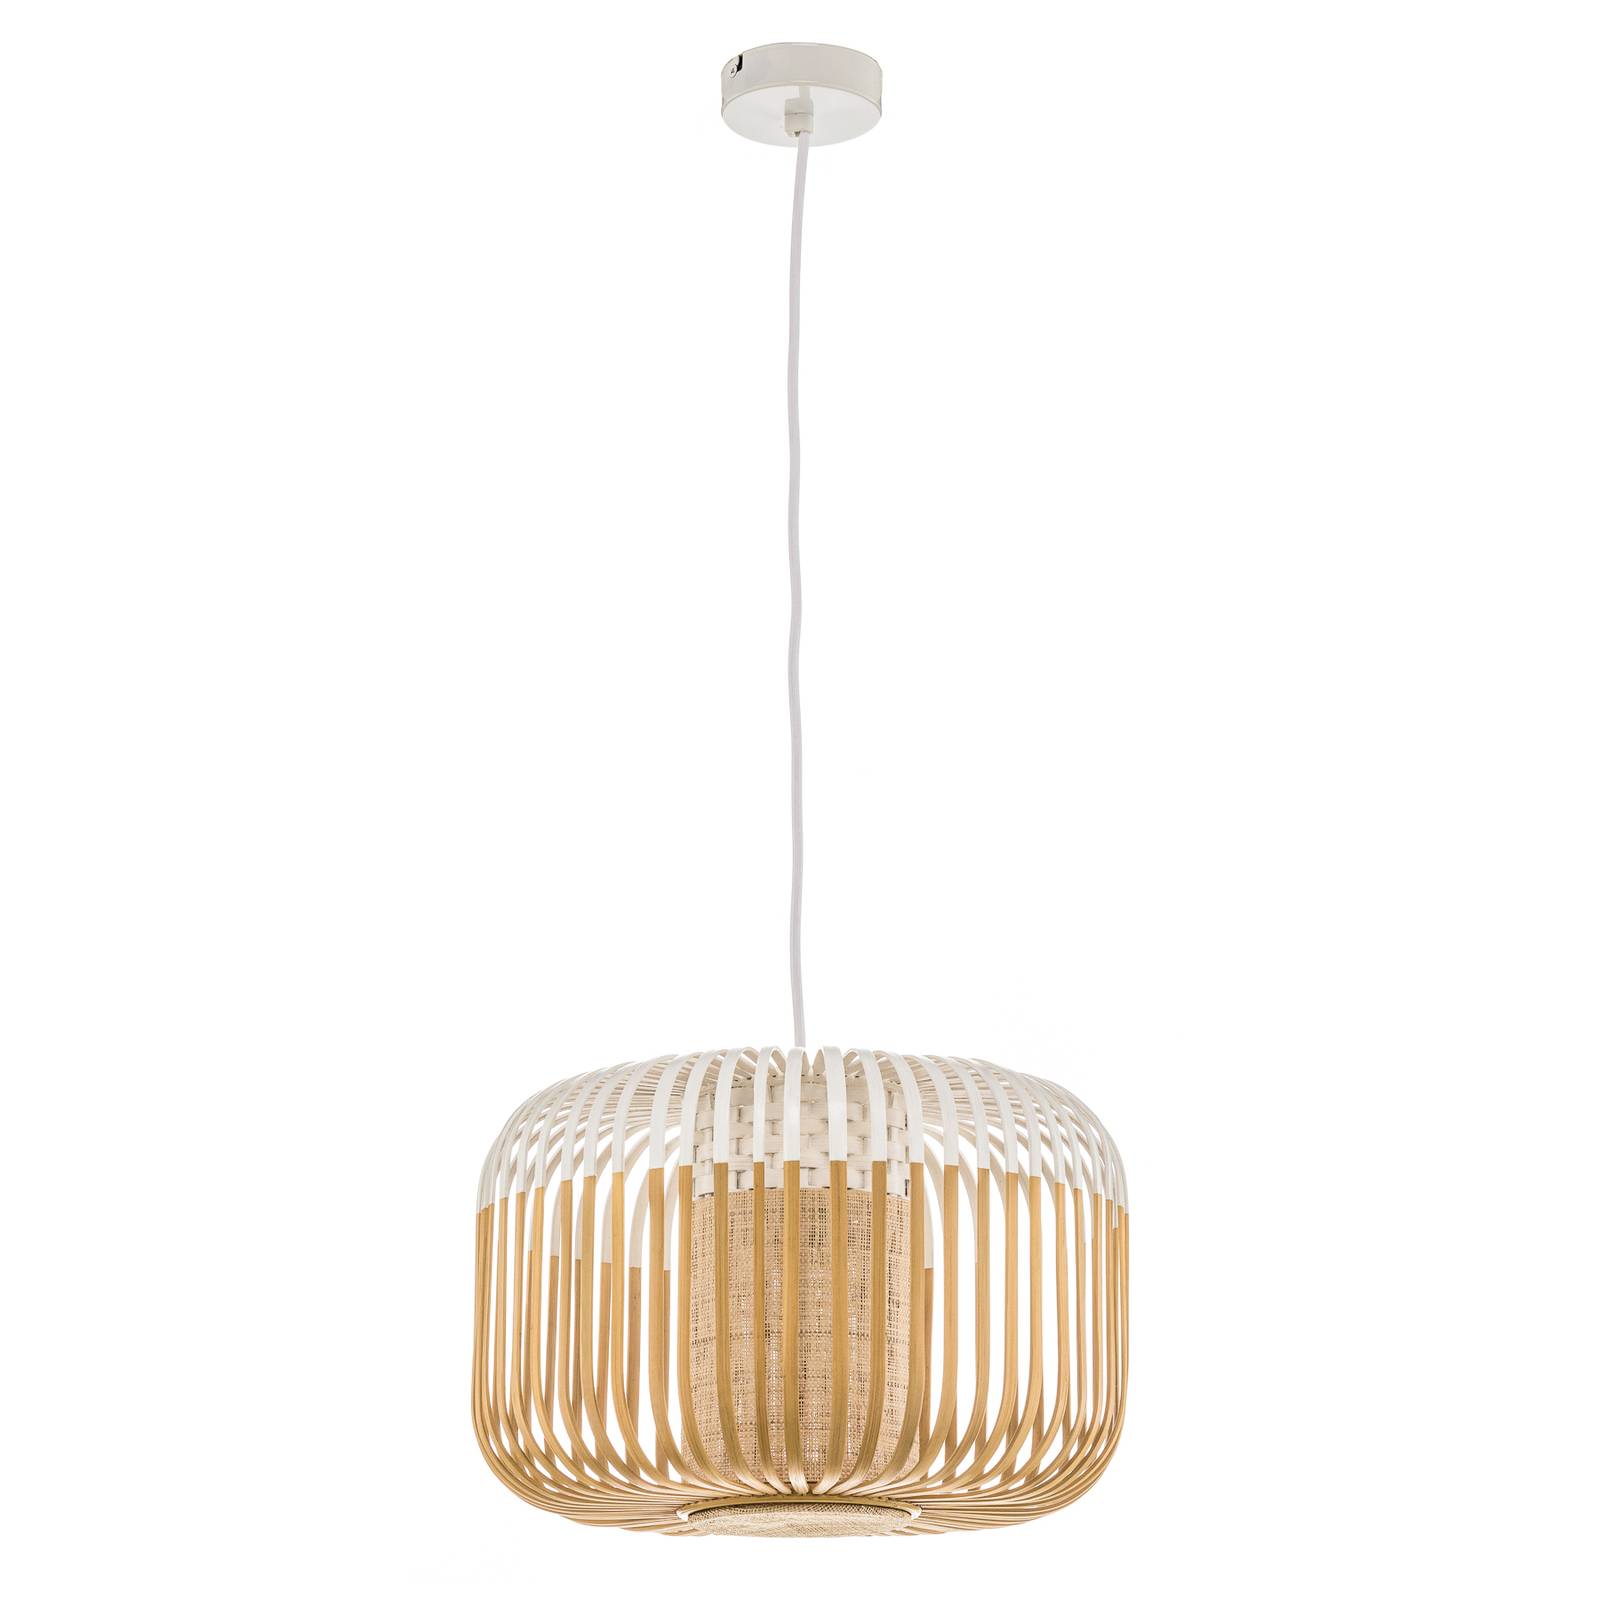 Image of Forestier Bamboo Light S suspension 35 cm blanche 3700663915334